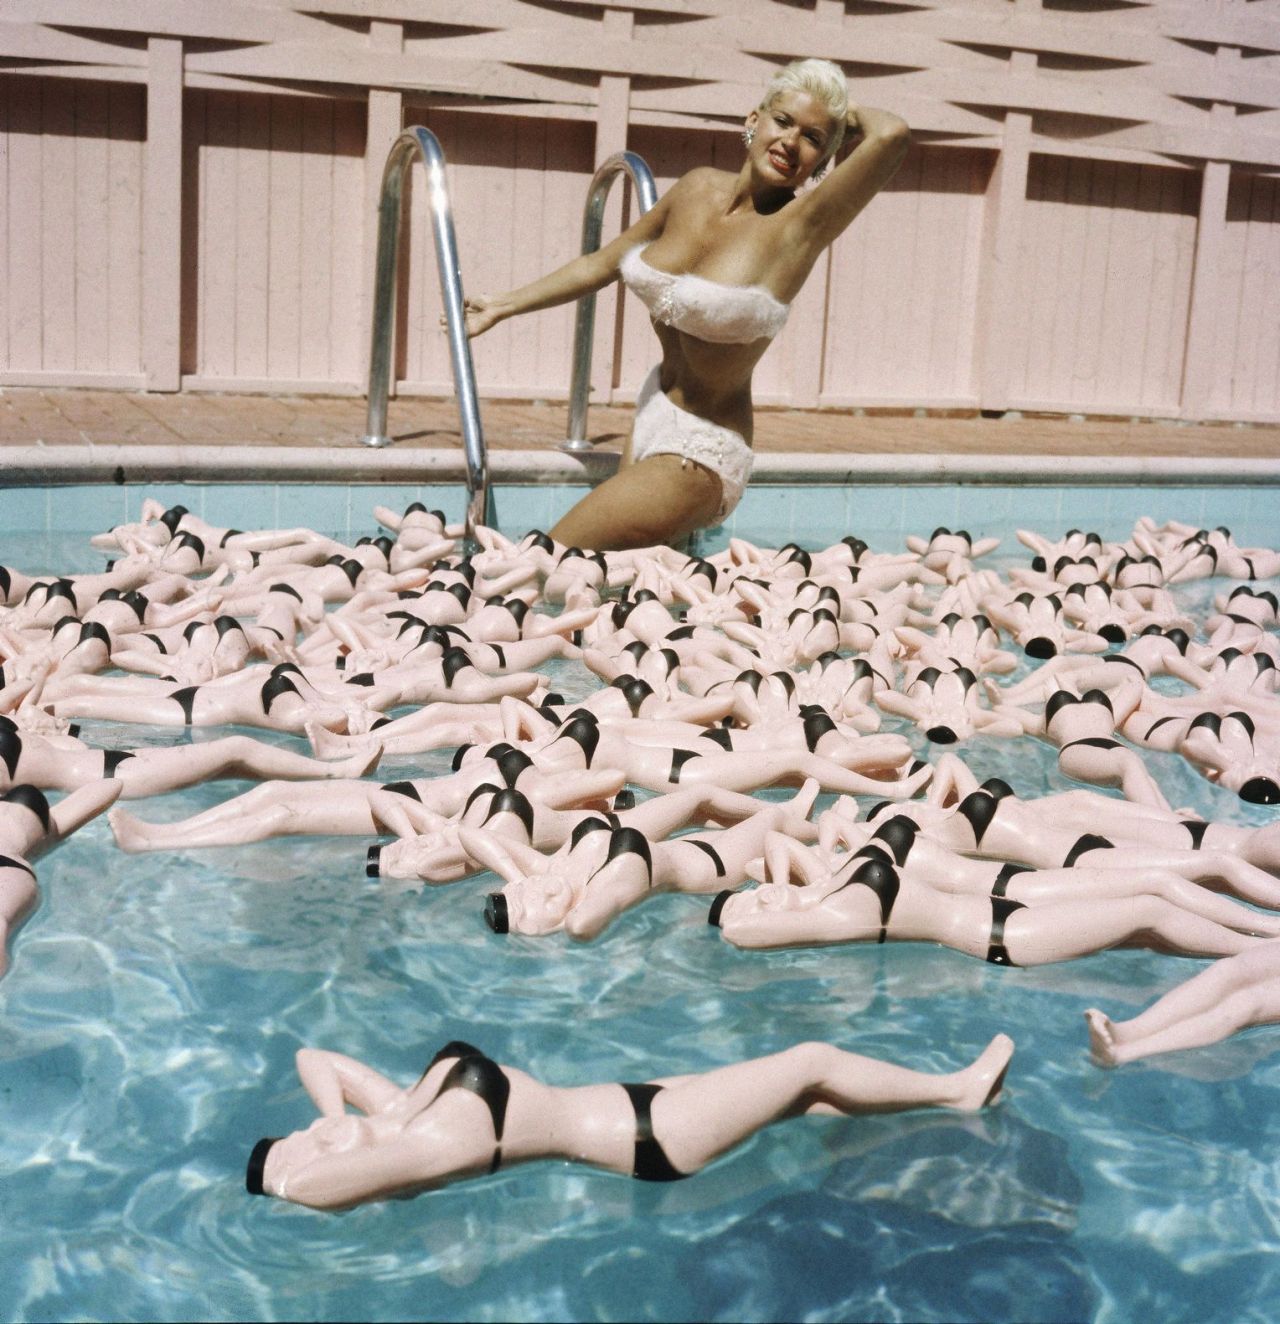 Jayne Mansfield posing in her pool with water bottles in her image, 1957. Photos by Allan Grant for LIFE magazine